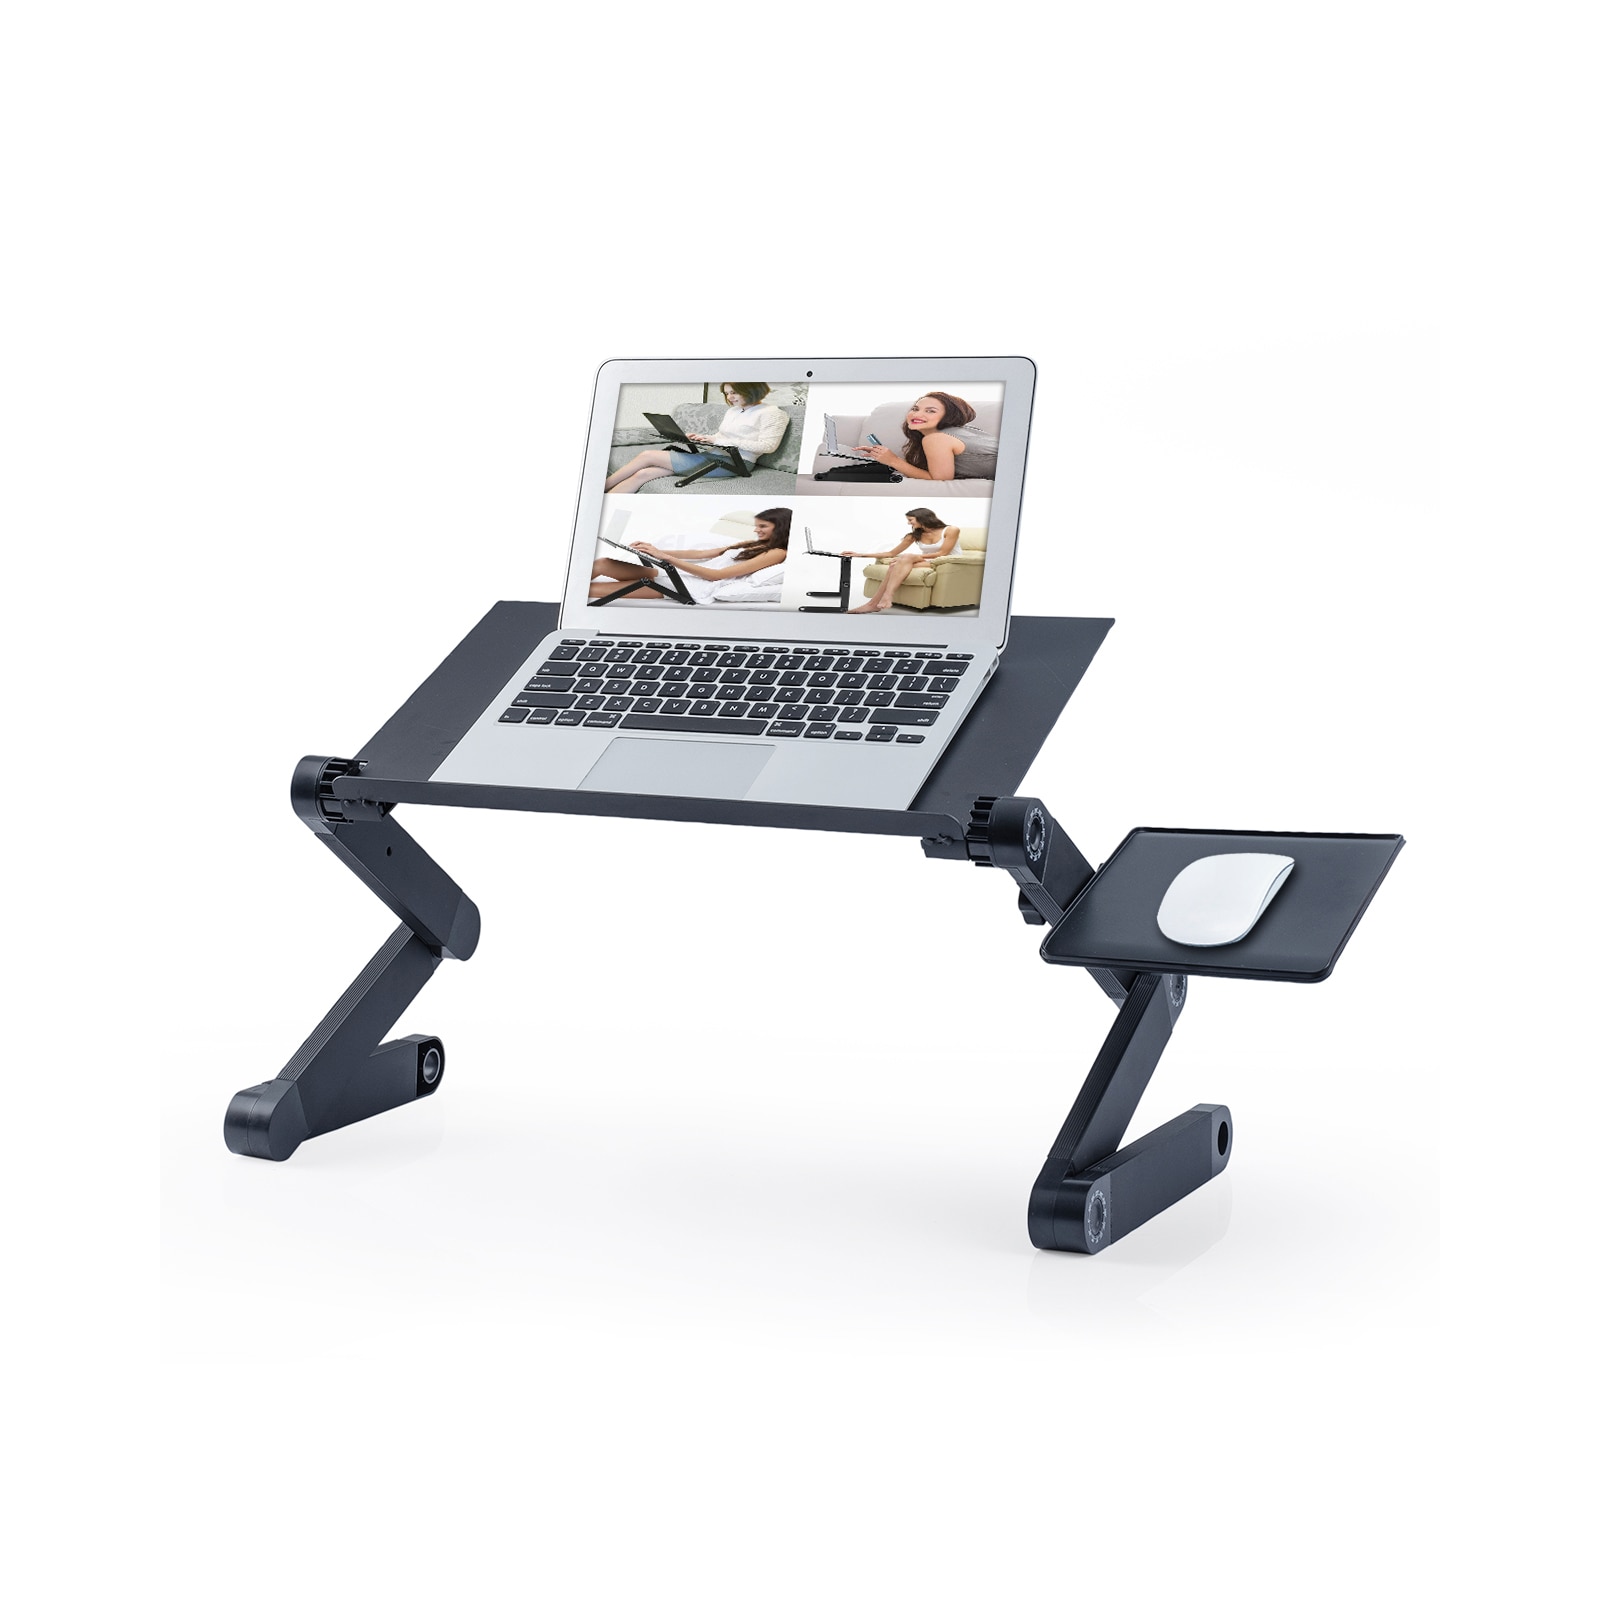 Rainbean RAINBEAN 16.5 in. Black Adjustable and Foldable Portable Laptop  Stand with Mouse Pad